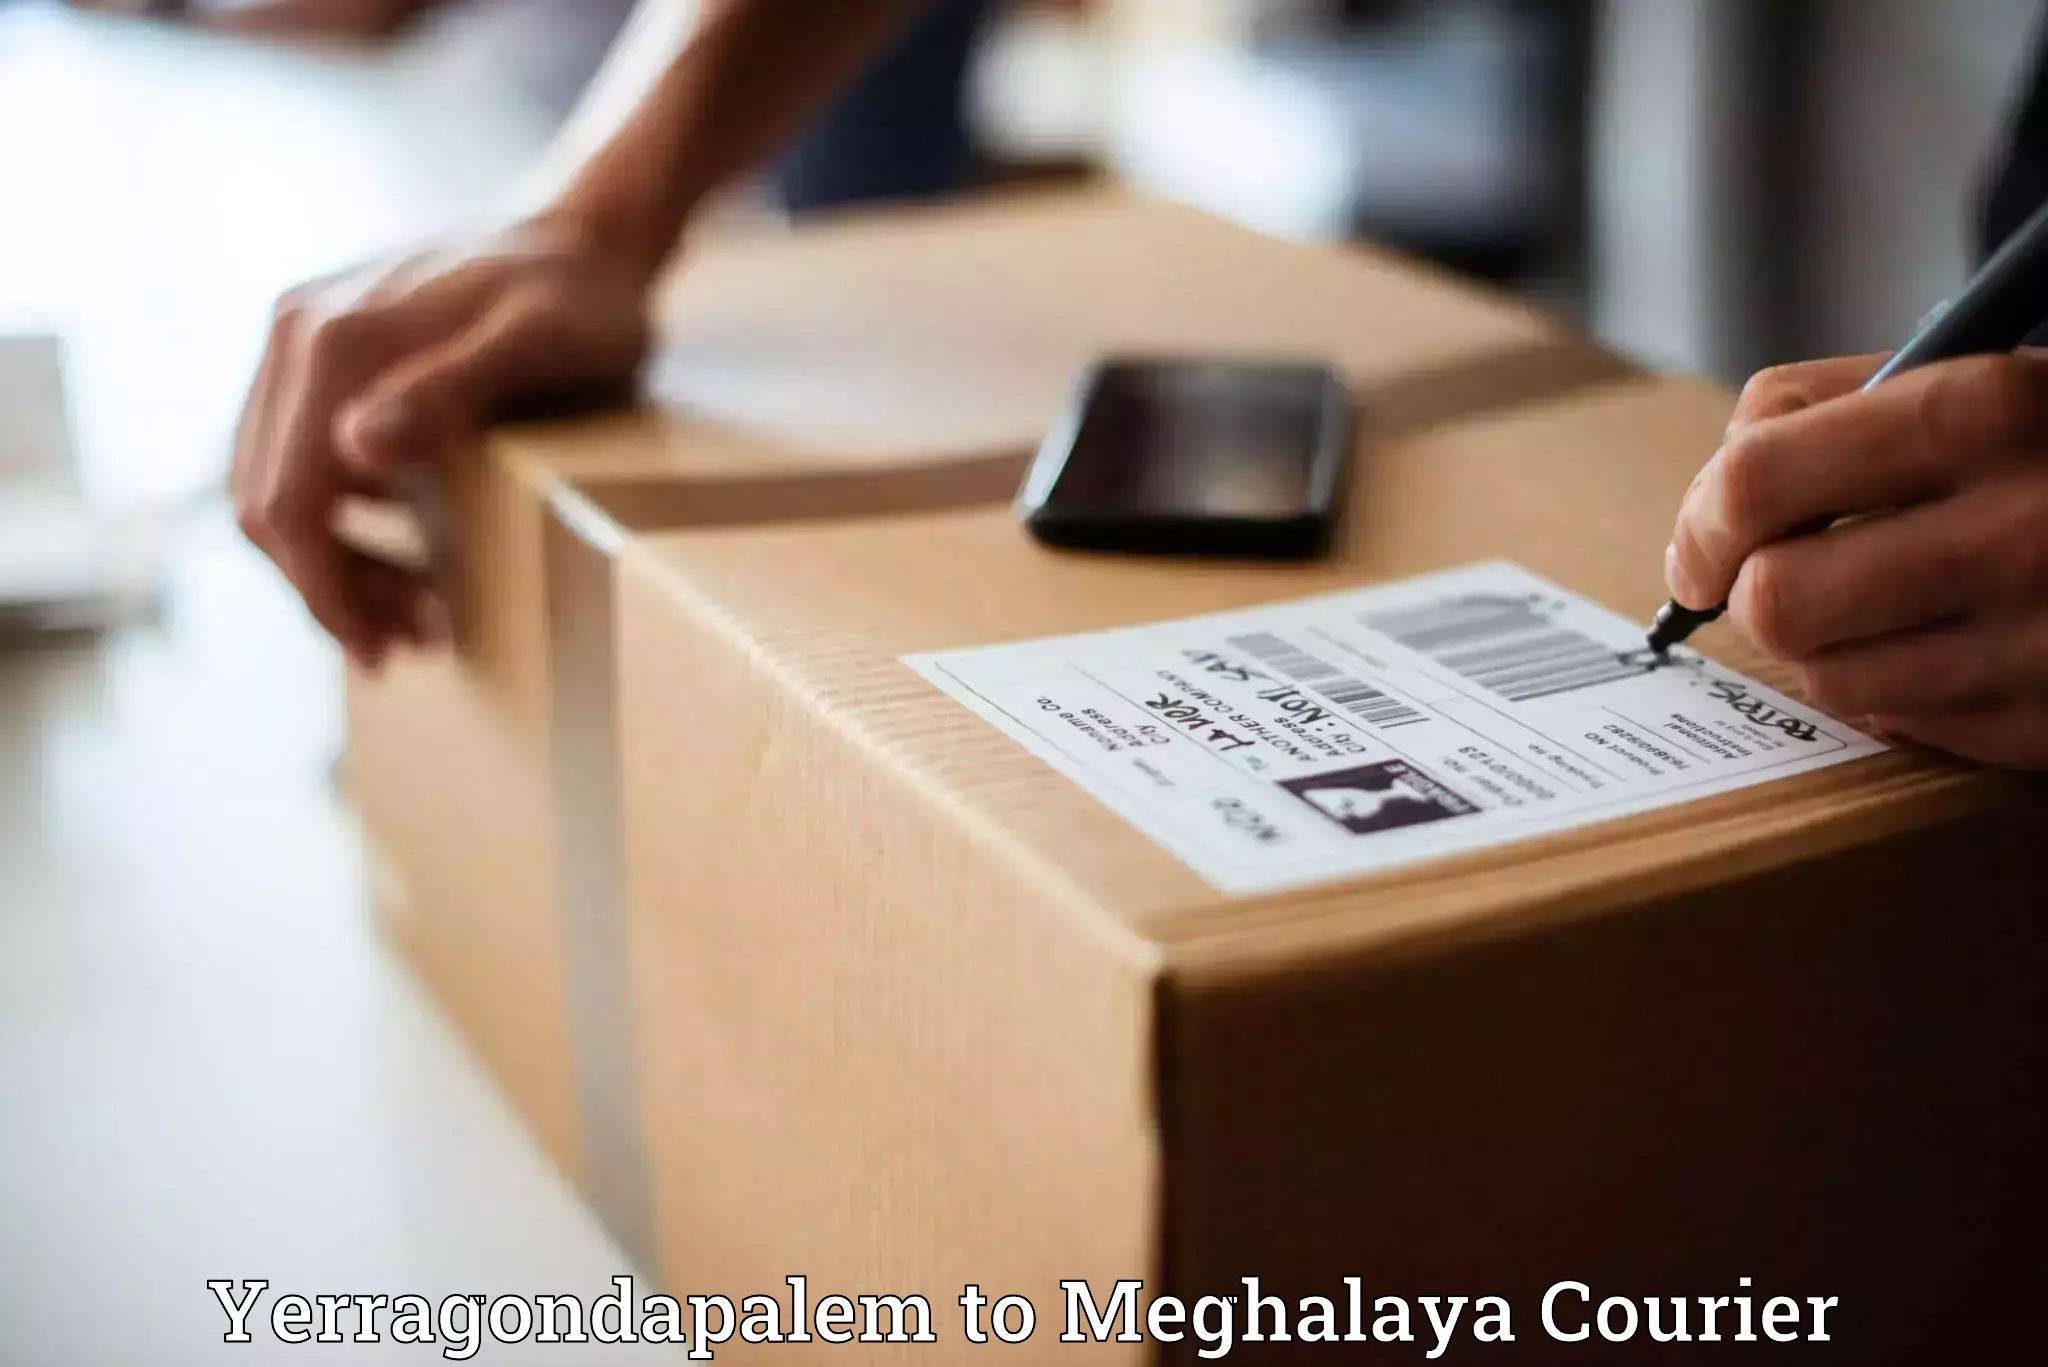 Local courier options in Yerragondapalem to Nongpoh